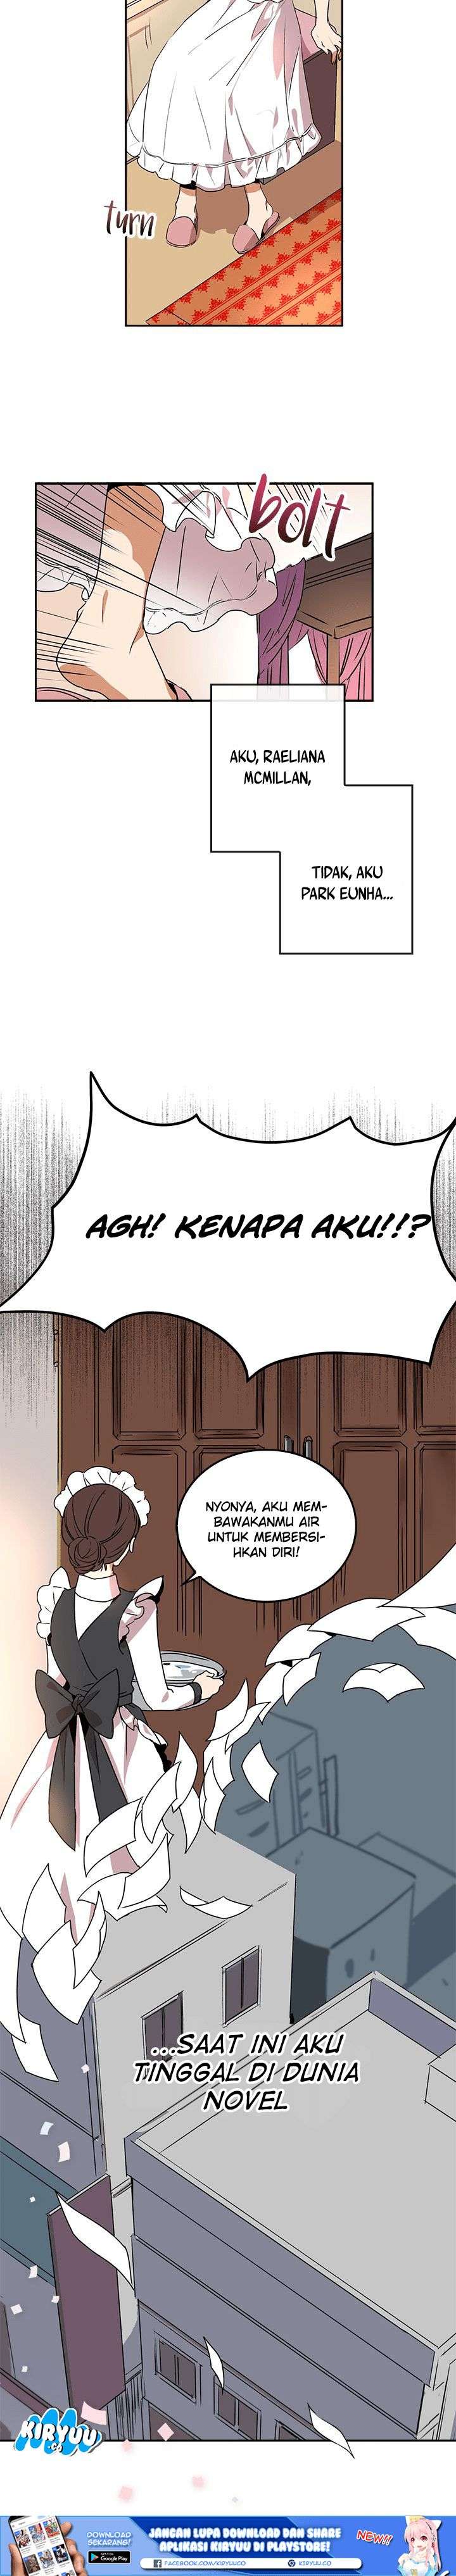 The Reason Why Raeliana Ended Up at the Duke’s Mansion Chapter 1 Bahasa Indonesia